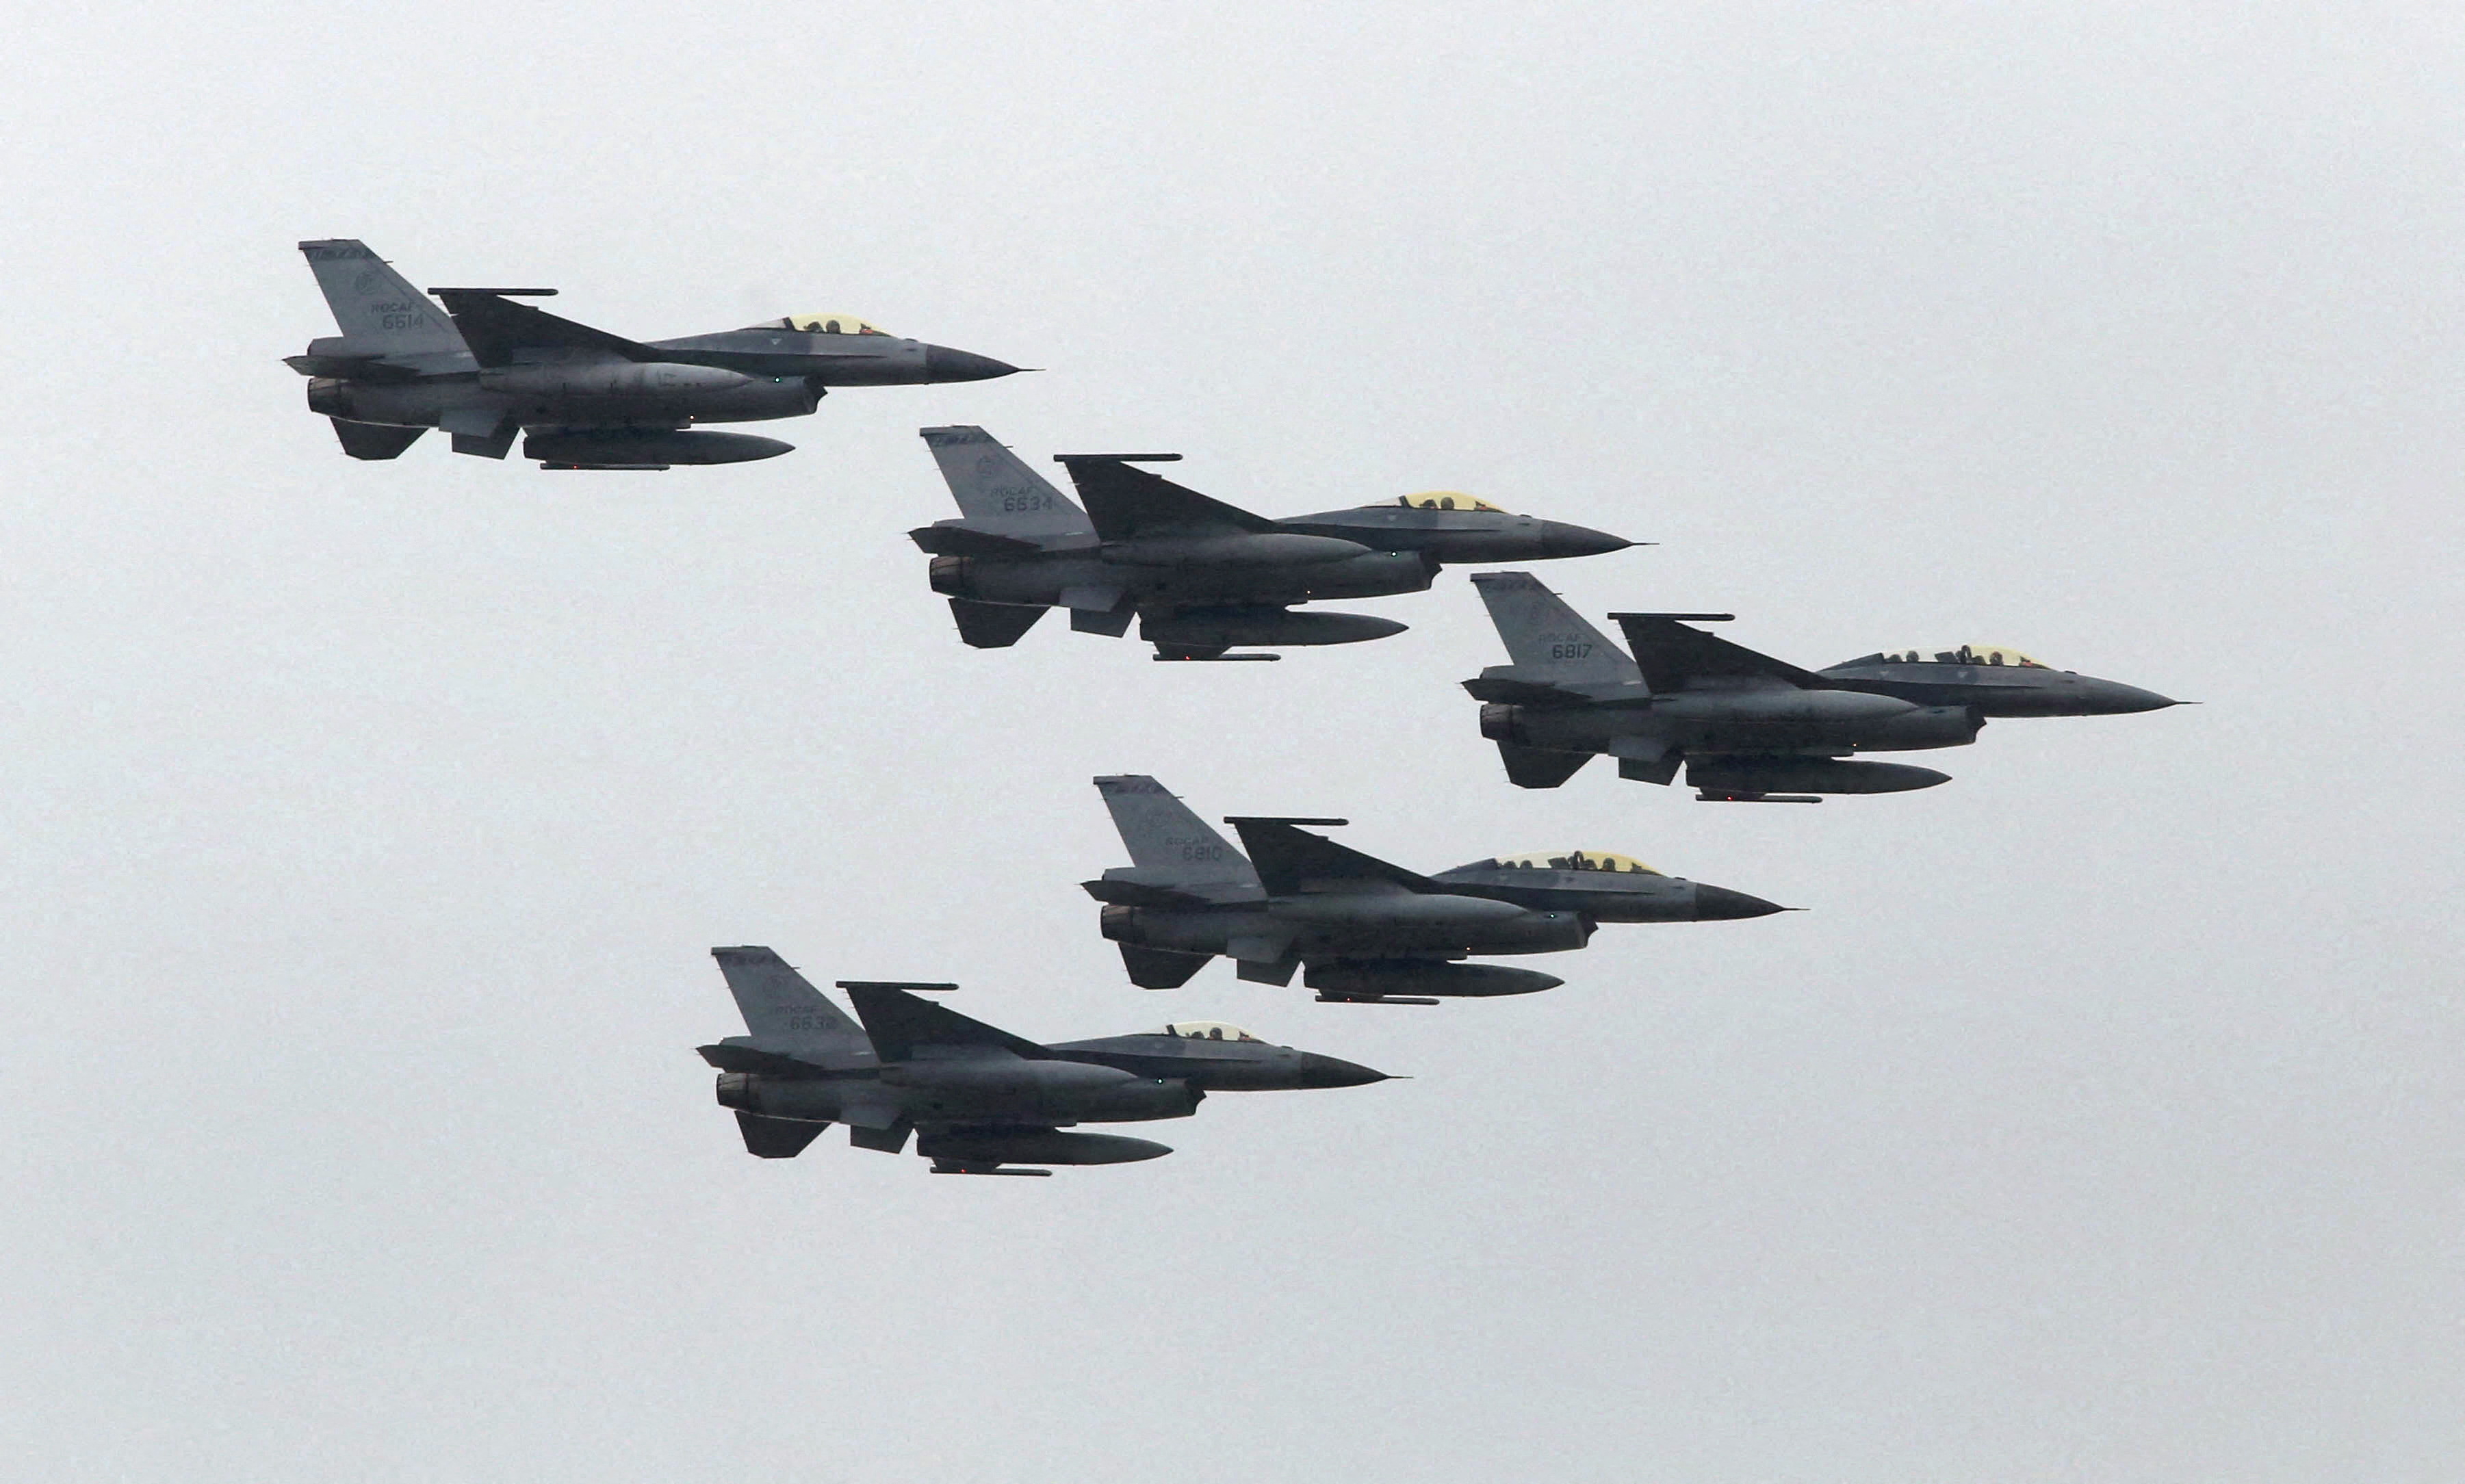 Taiwan Air Force's F-16 fighter jets fly during the annual Han Kuang military exercise at an army base in Hsinchu